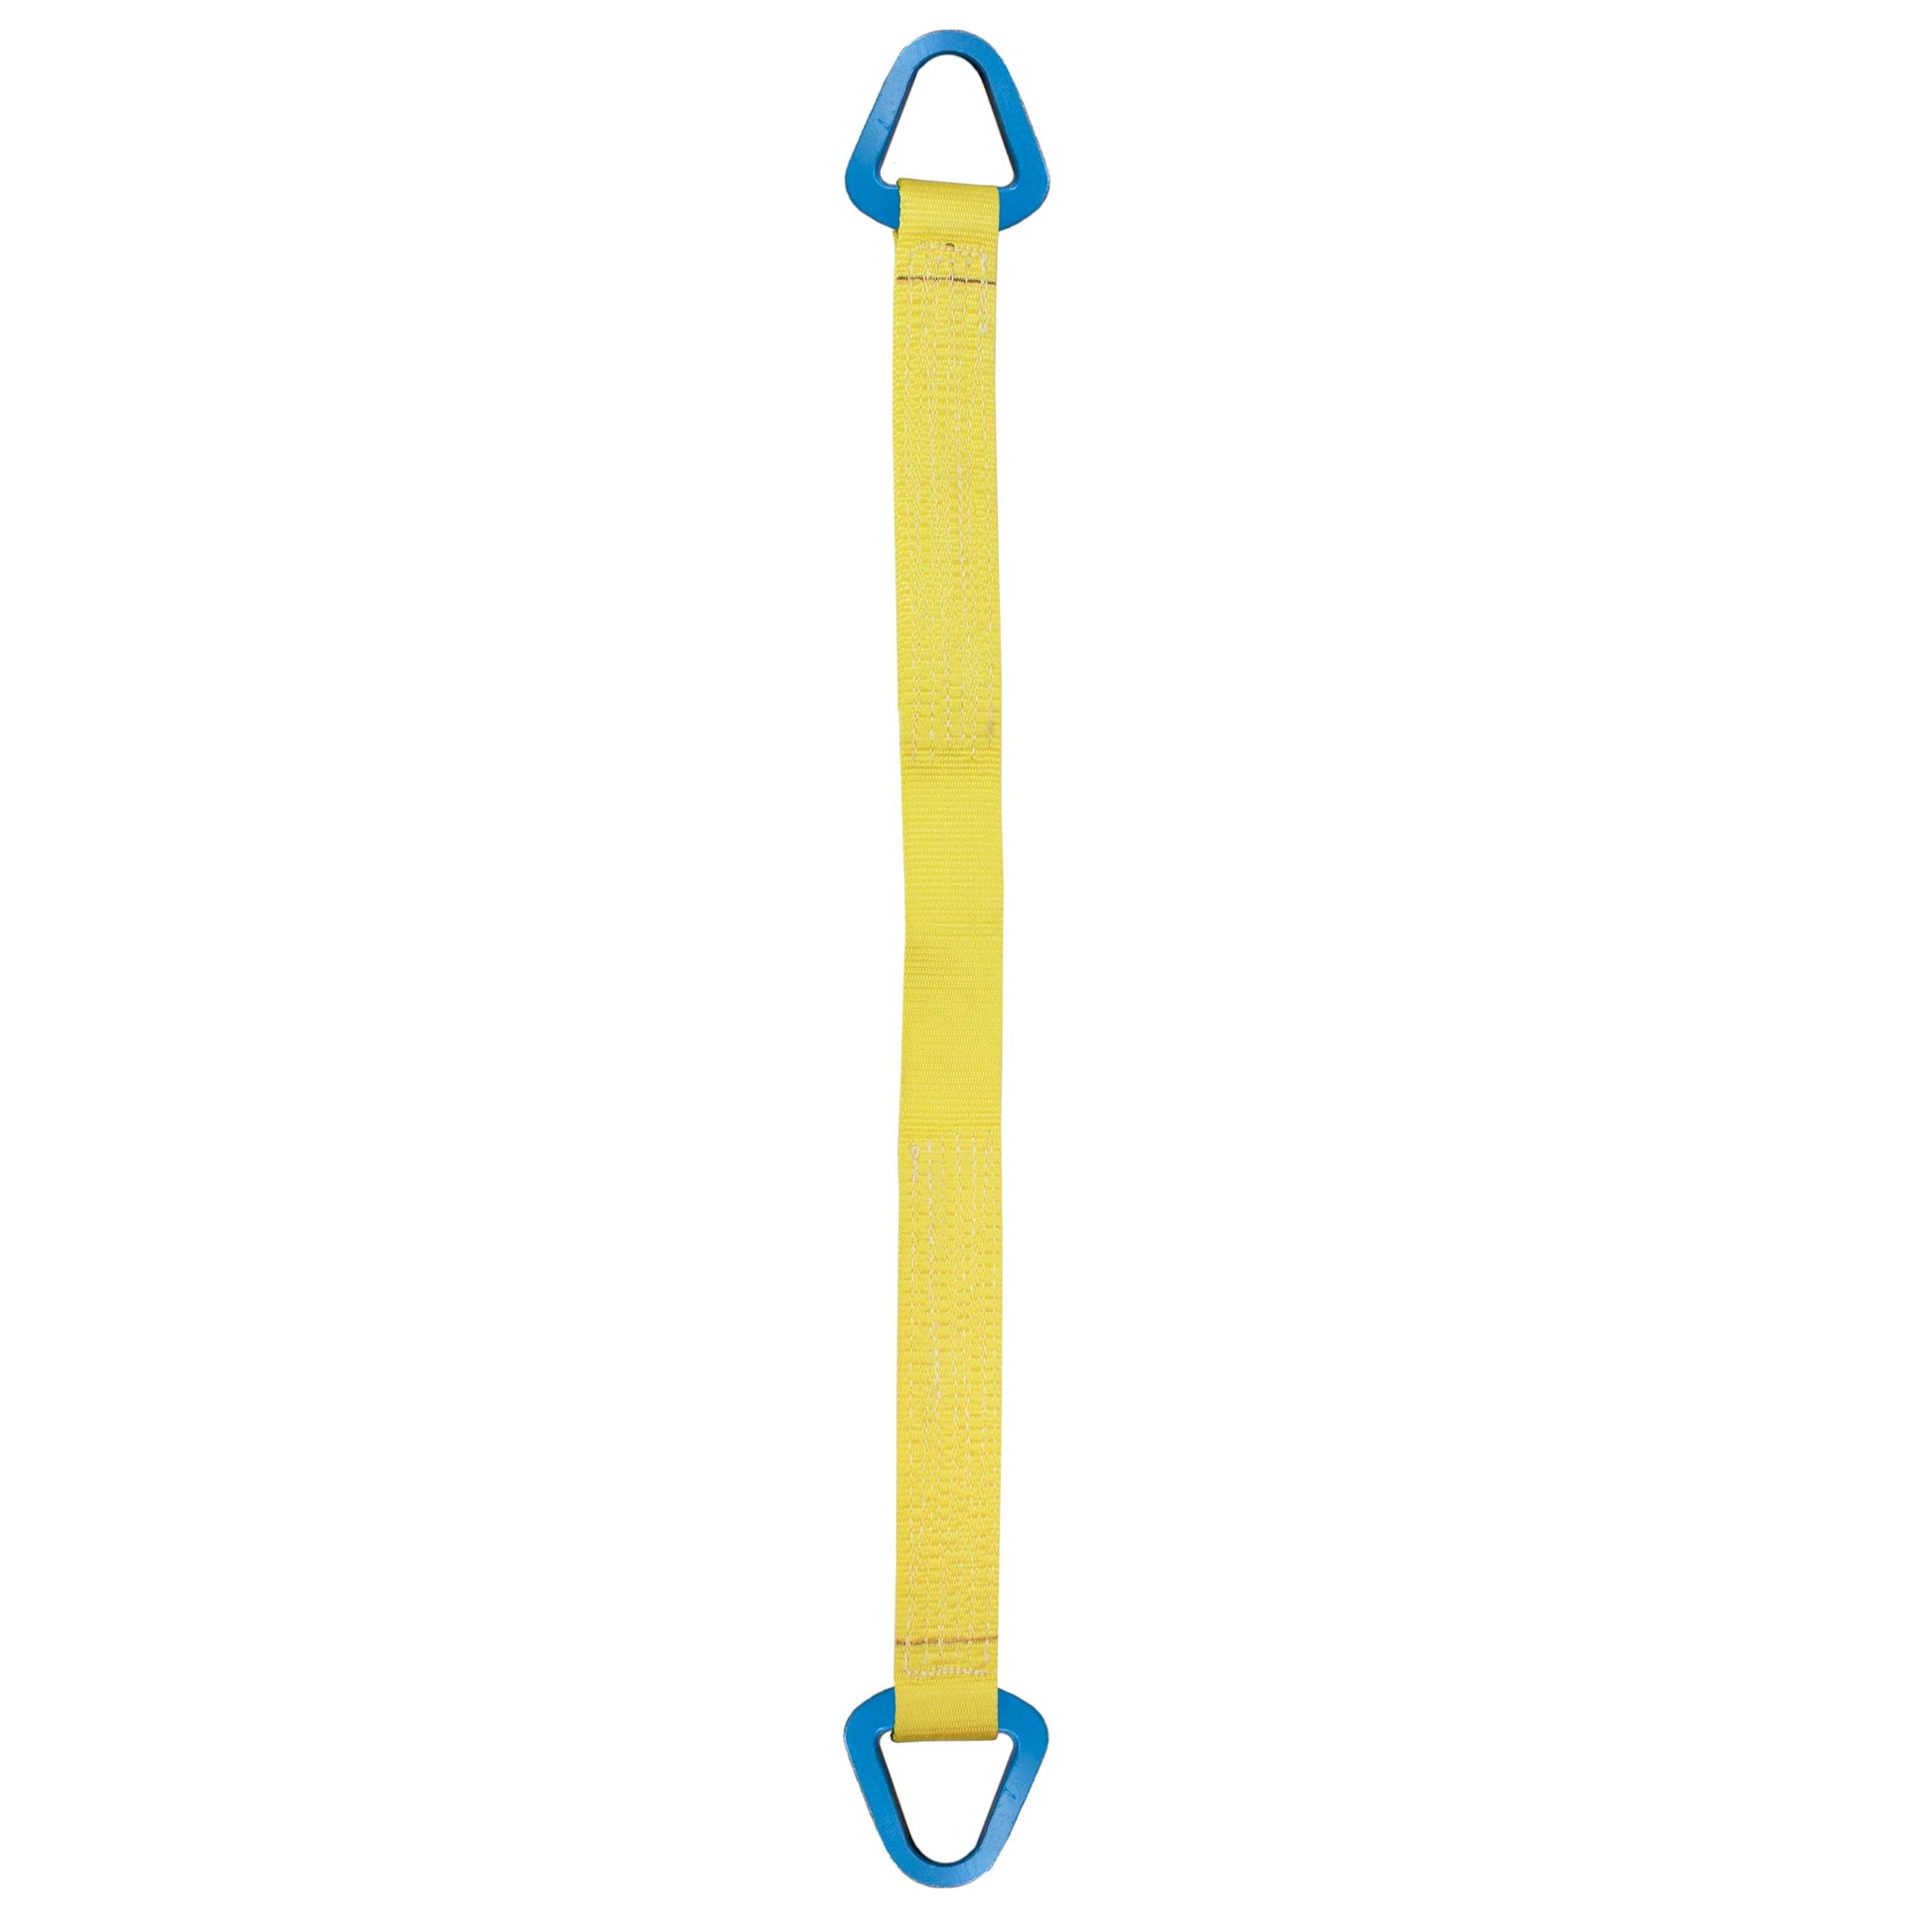 Nylon Lifting Sling Triangle 8 inch x 20 foot 2ply image 1 of 2